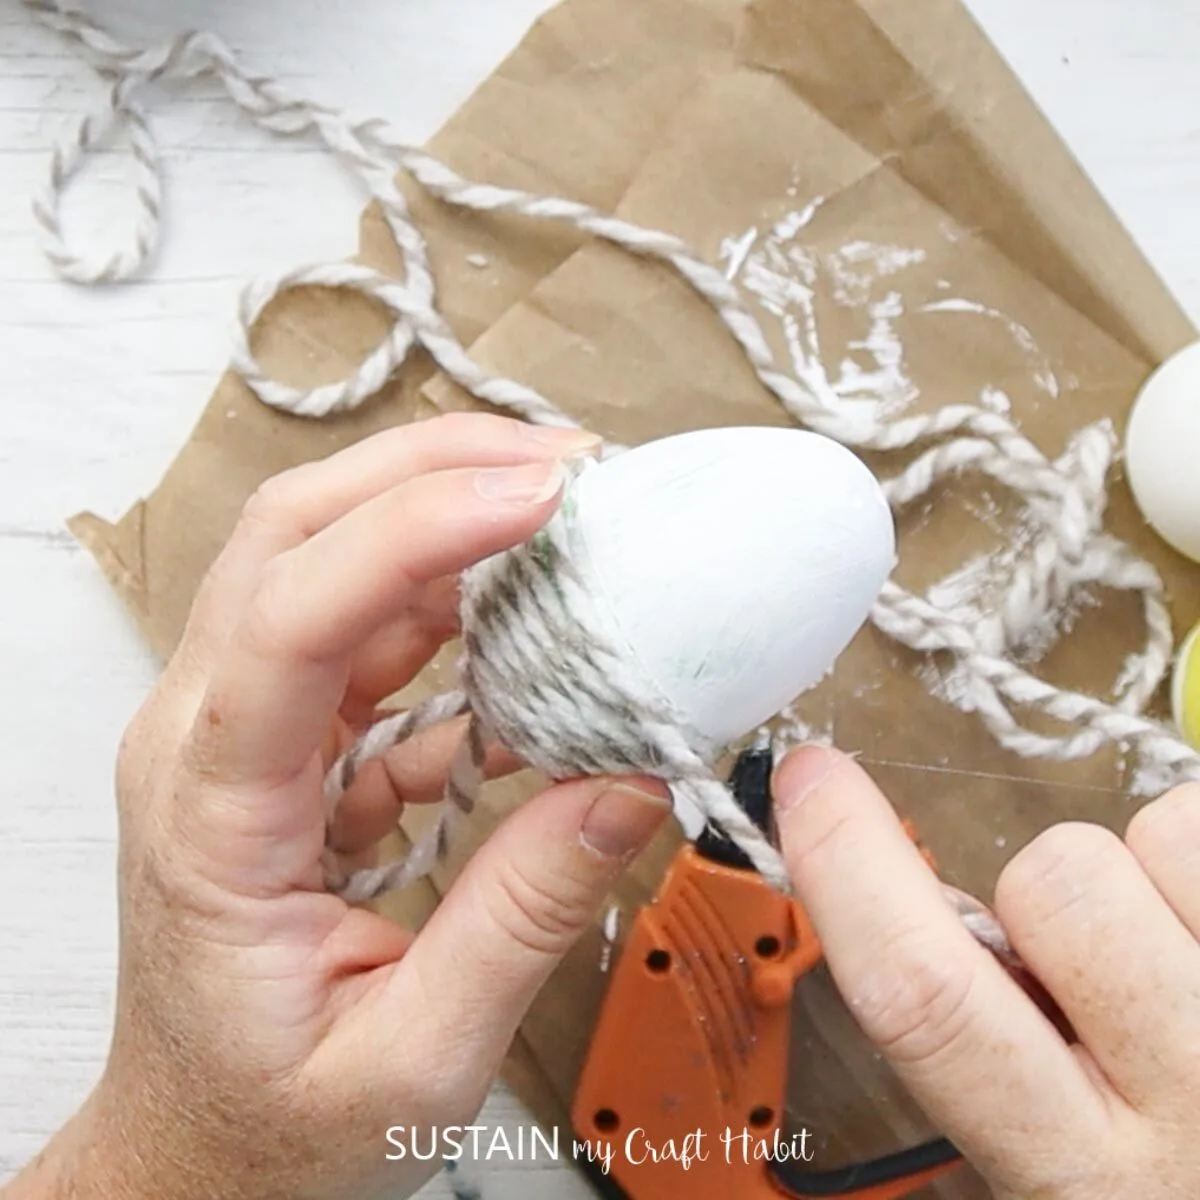 Finishing the upcycled plastic egg acorn ornament craft by gluing the yarn.